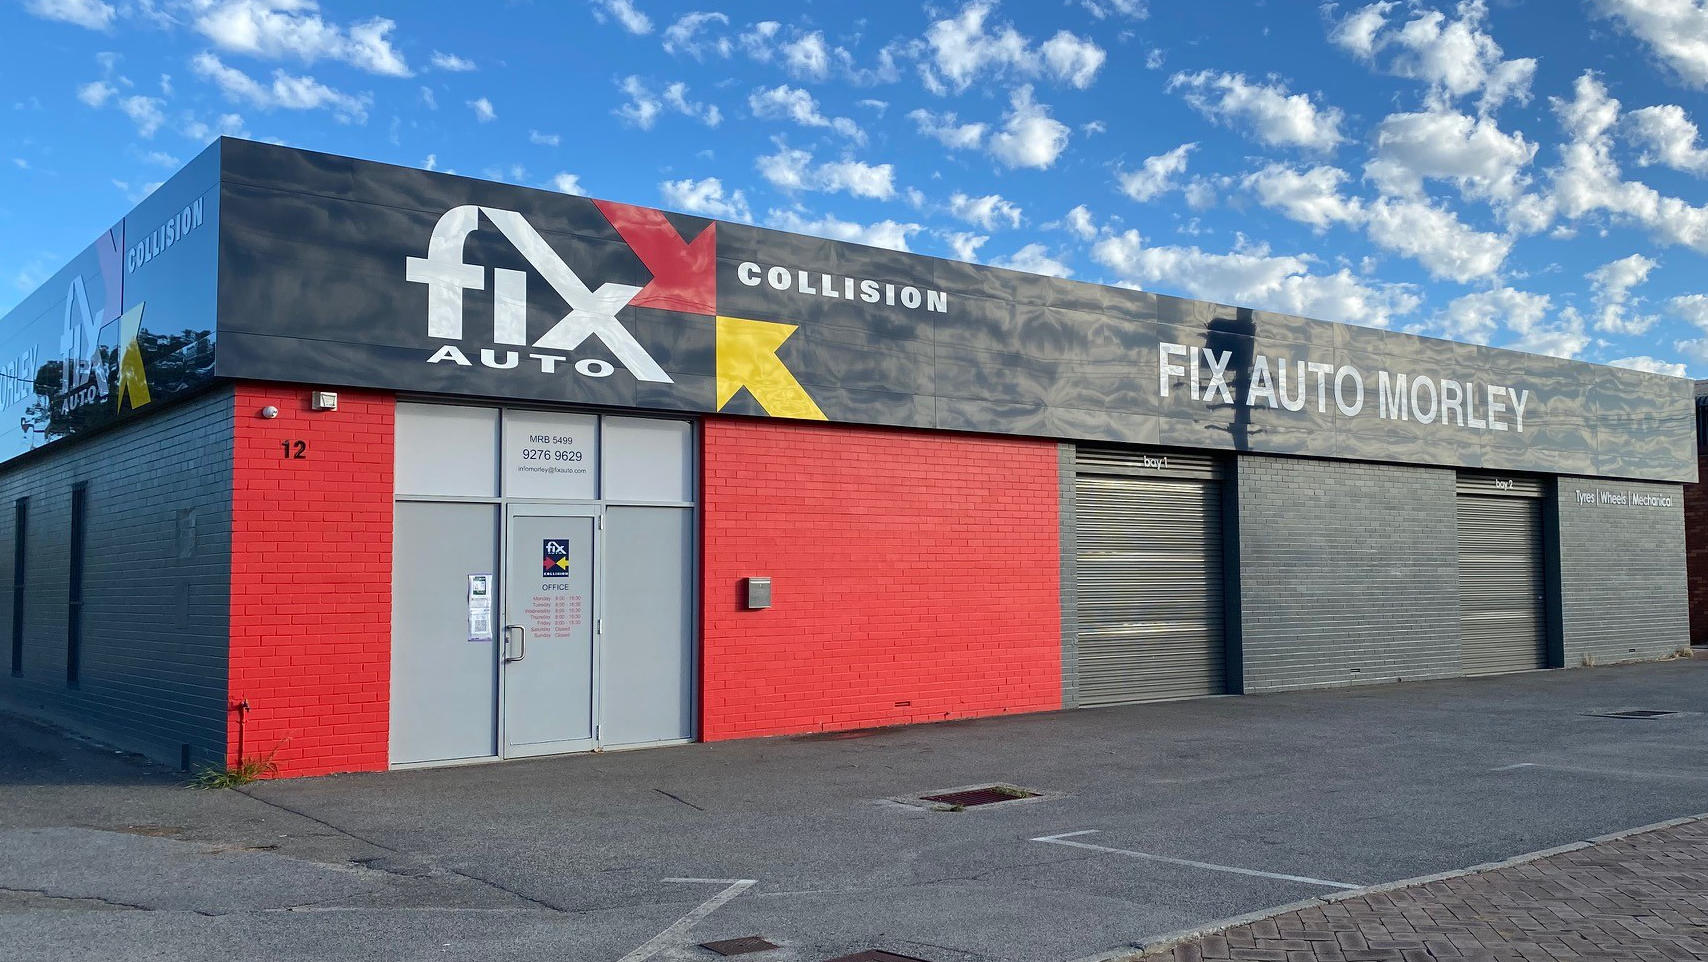 With Business Booming, Fix Auto Morley Expands